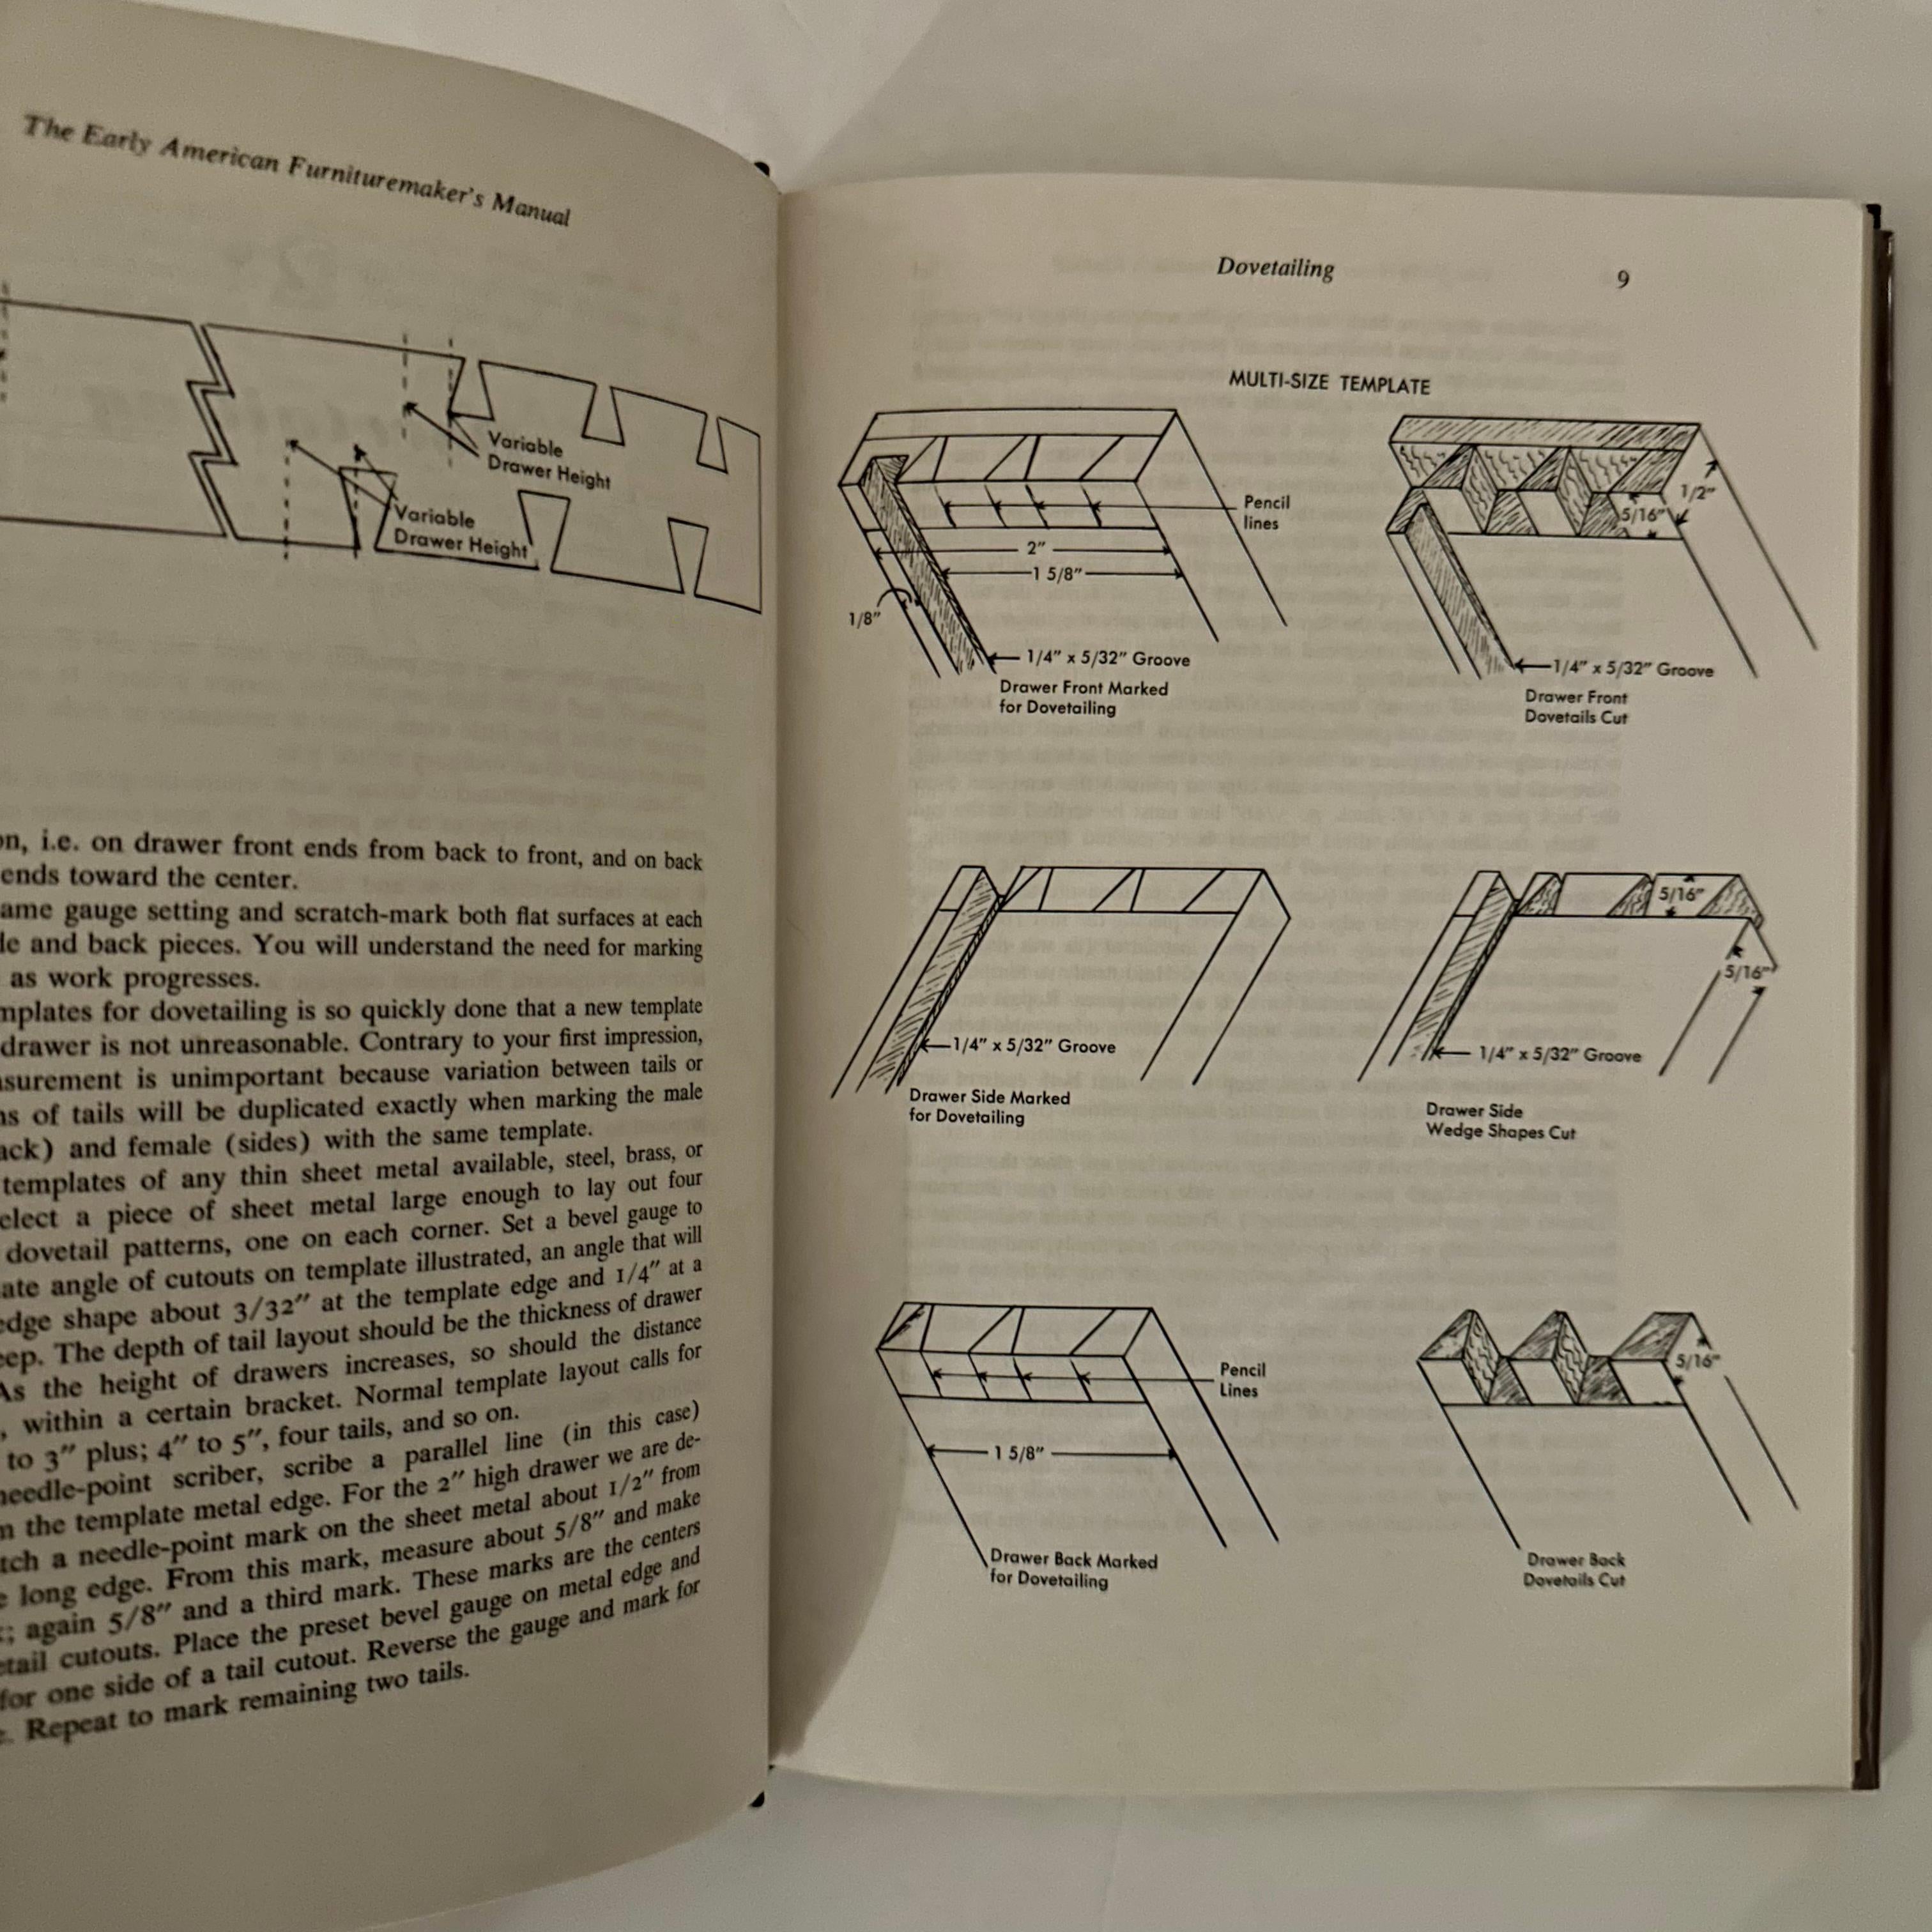 The Early American Furniture Maker's Manual - A. W. Marlow - New York, 1974 For Sale 1